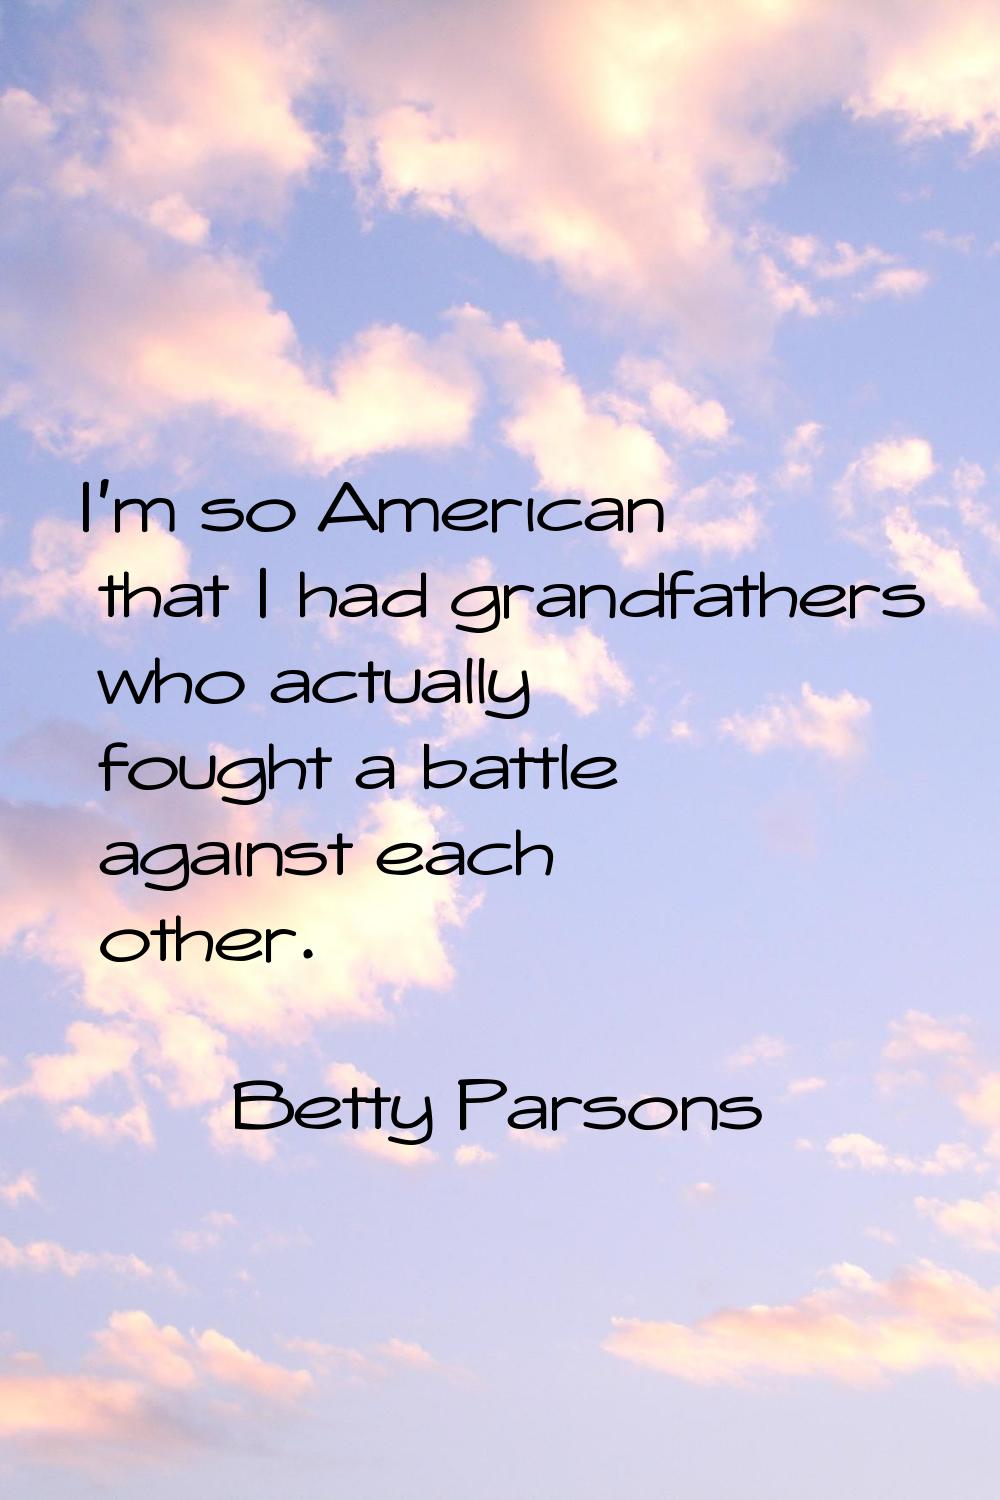 I'm so American that I had grandfathers who actually fought a battle against each other.